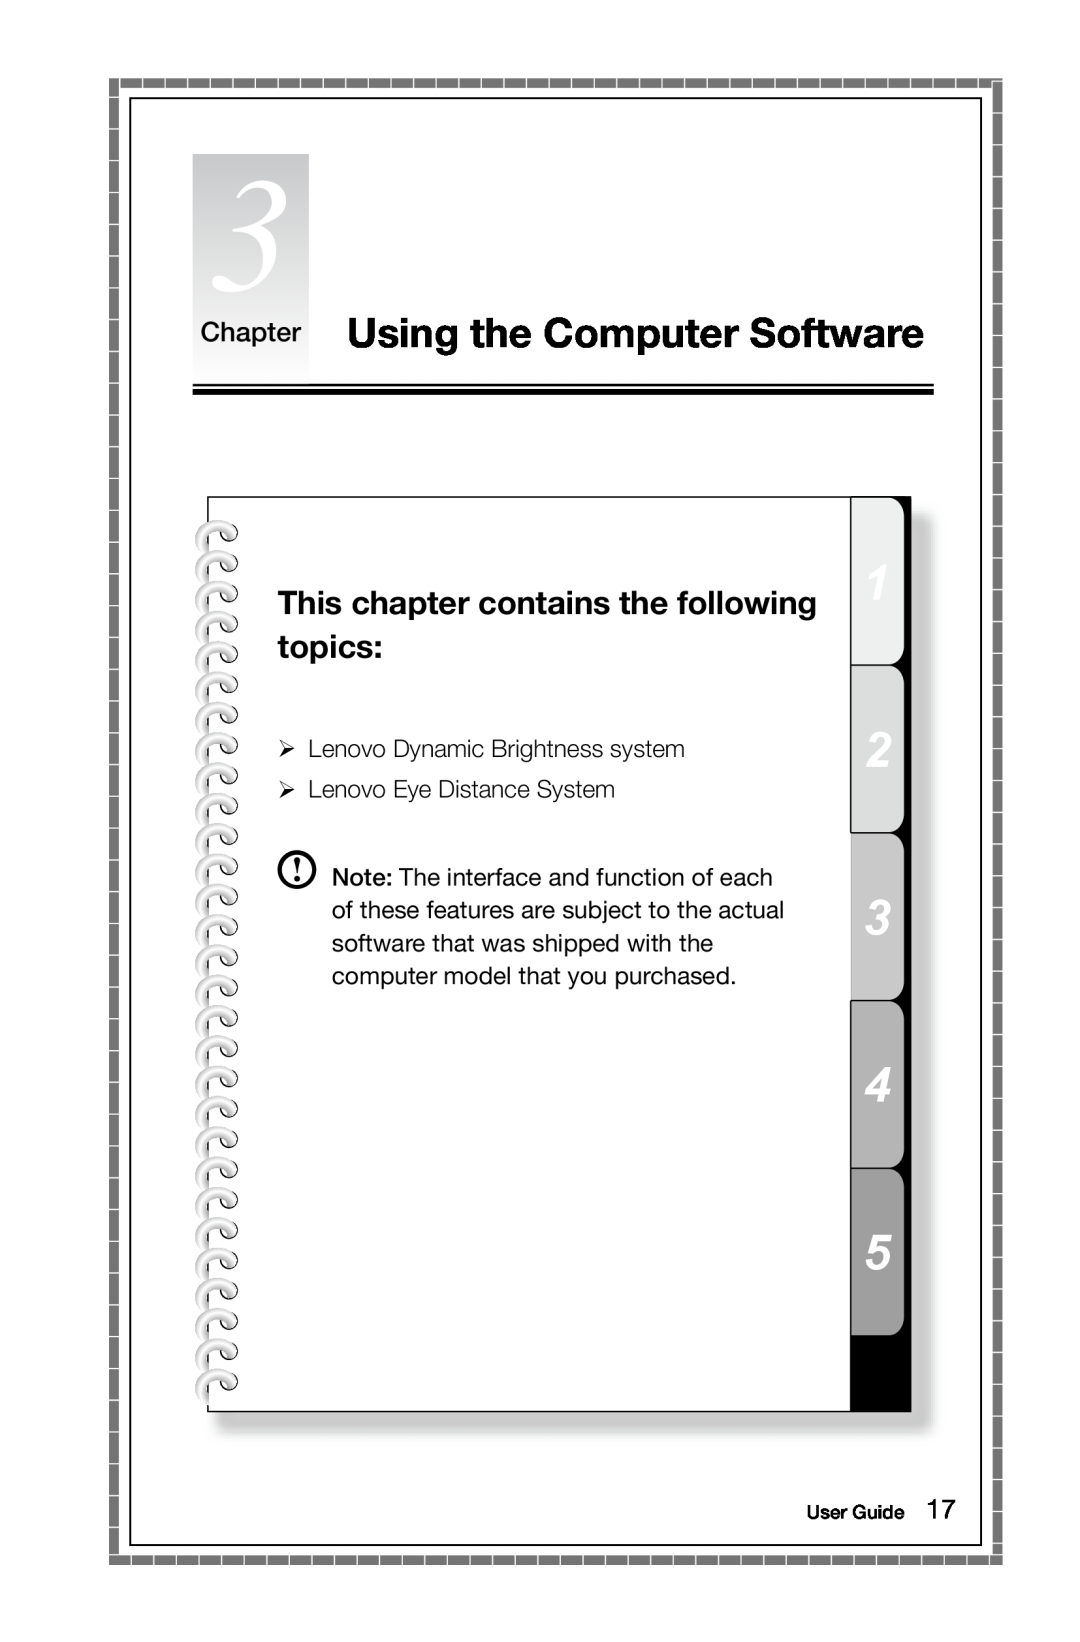 Lenovo 10041-10049 manual Chapter Using the Computer Software, This chapter contains the following topics, User Guide 